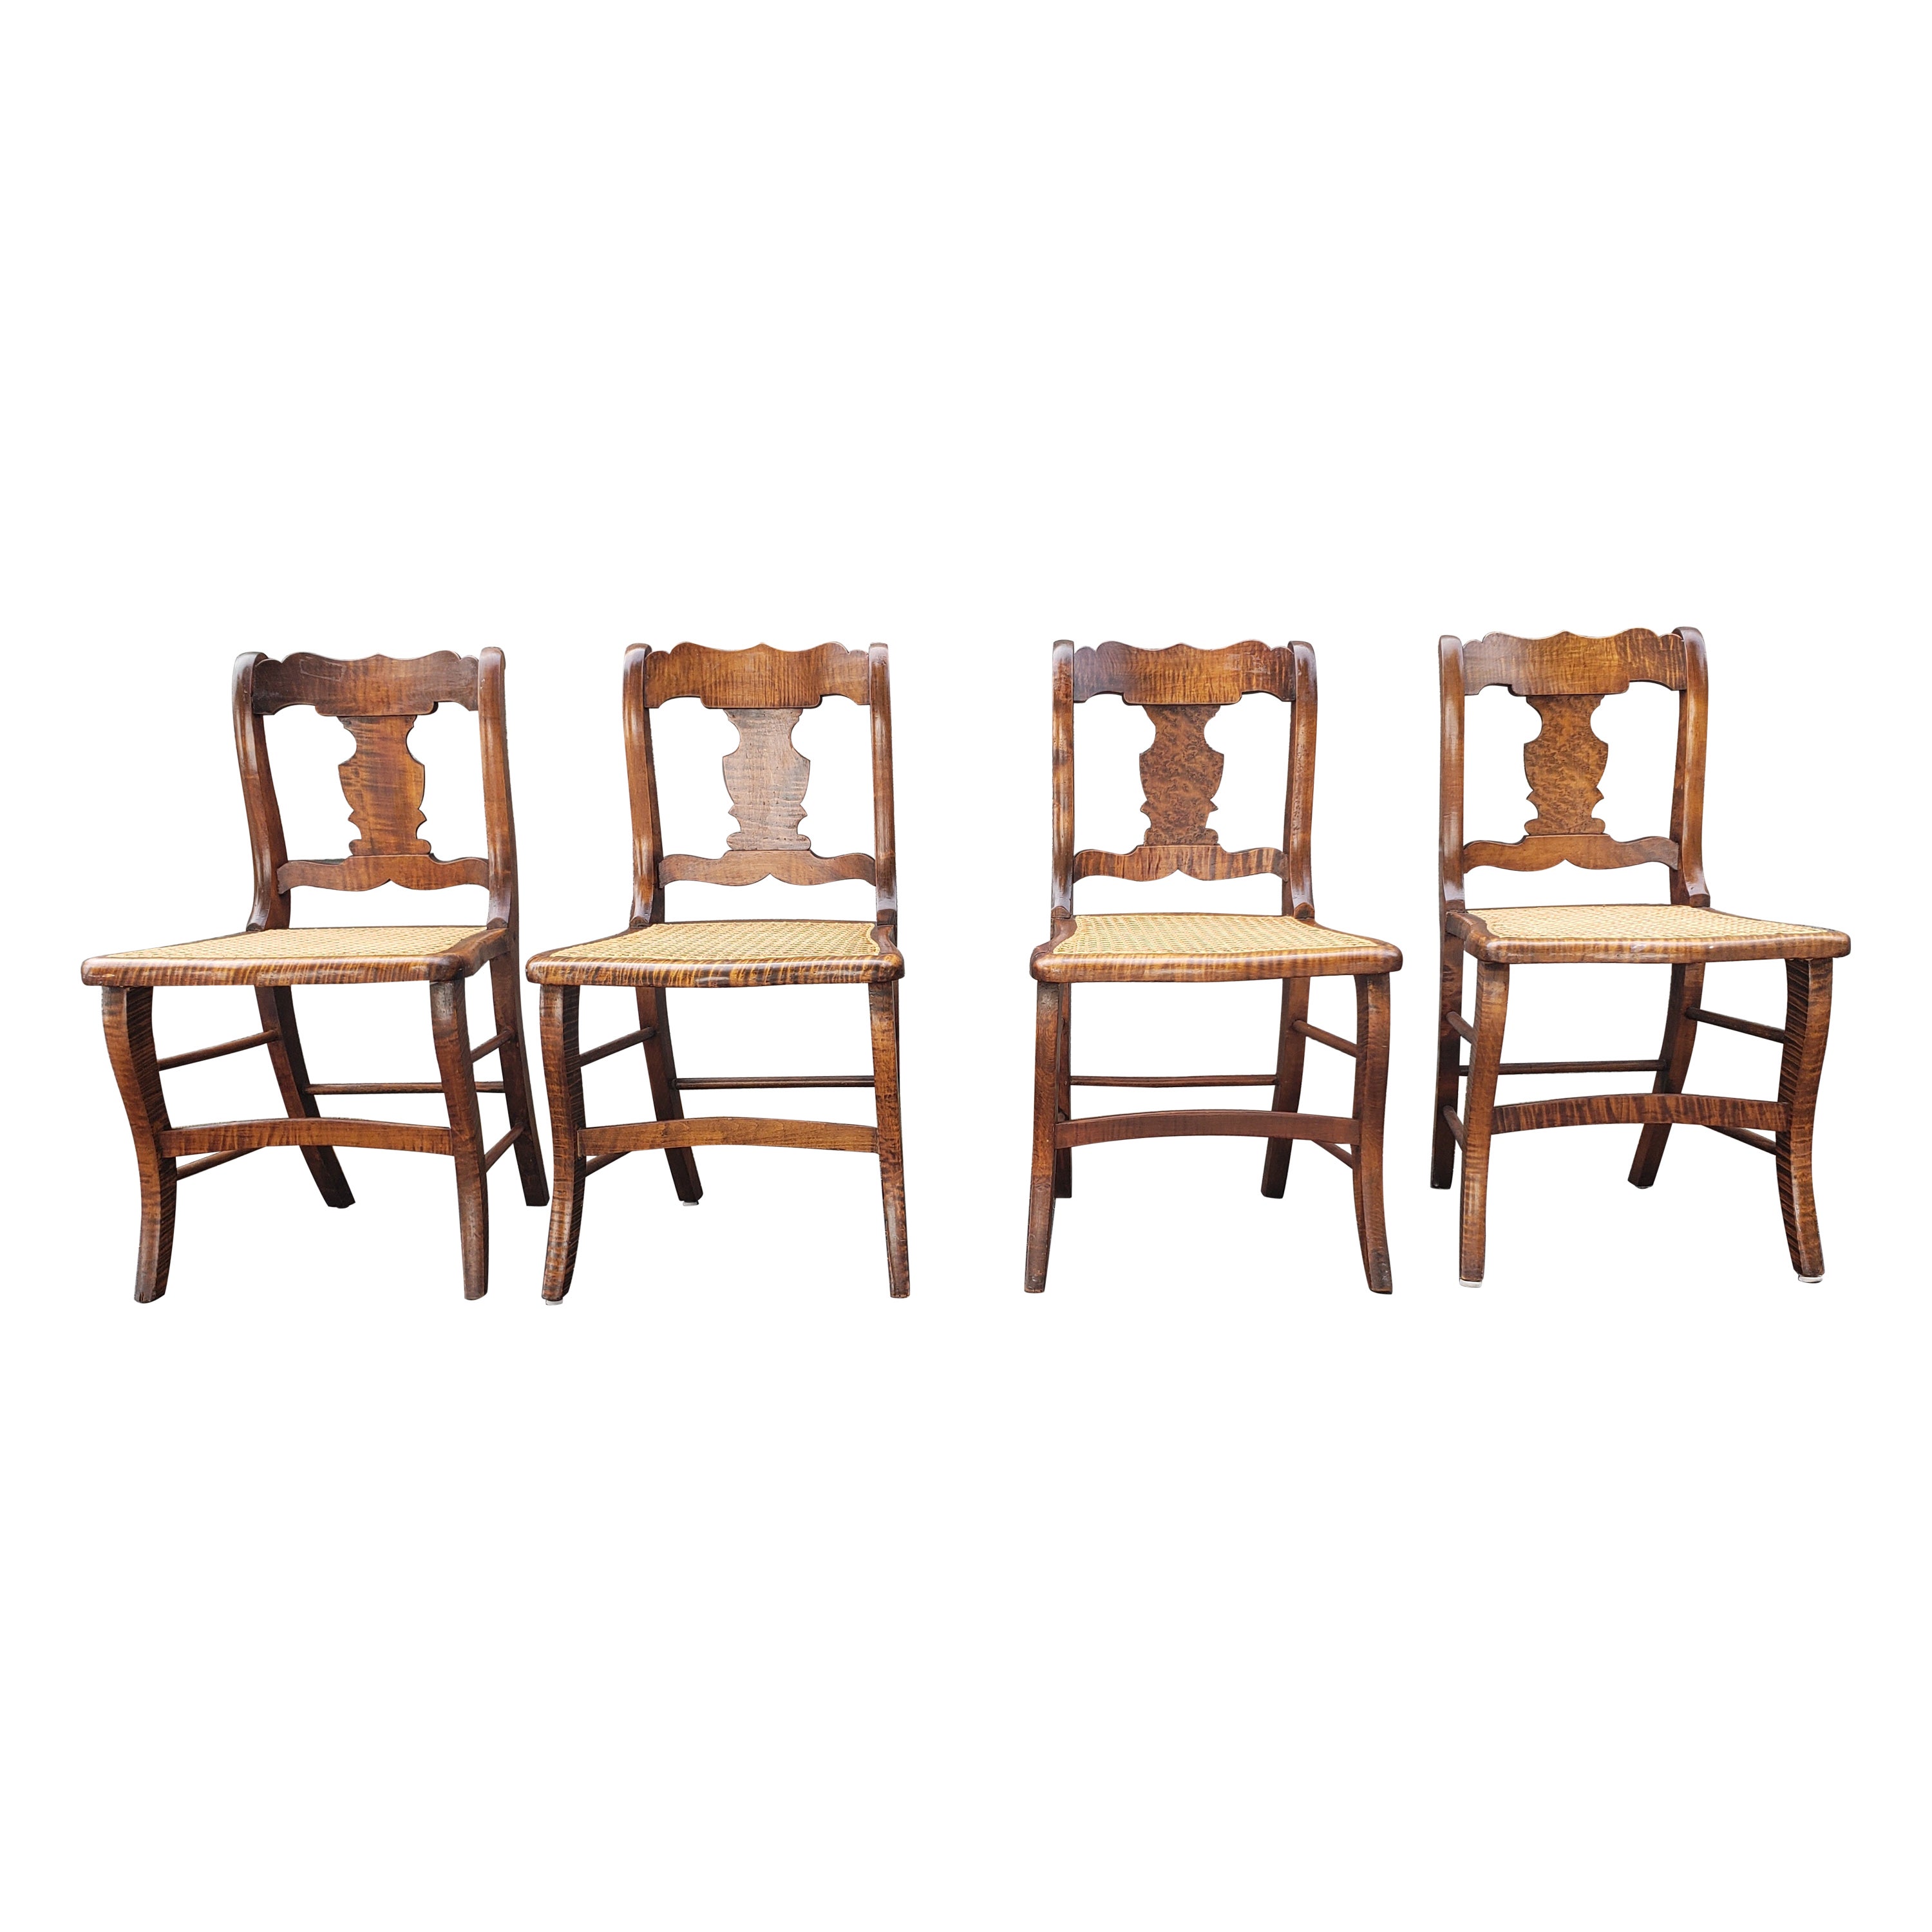 Early American Tiger Wood and Cane Seat Chairs, Set of 4